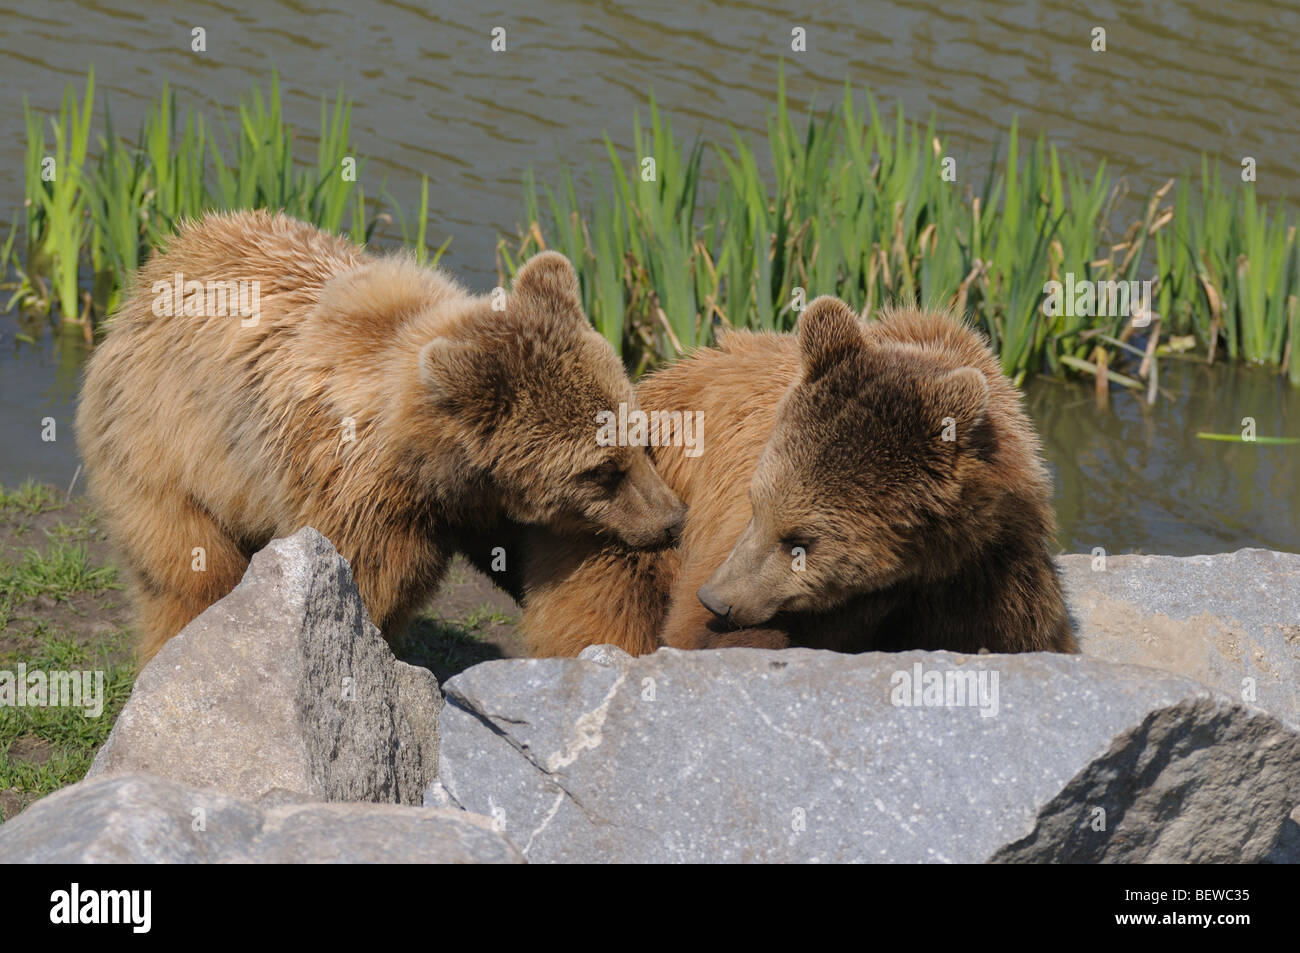 Two brown bears (Ursus Actos) playing with each other, full shot Stock Photo